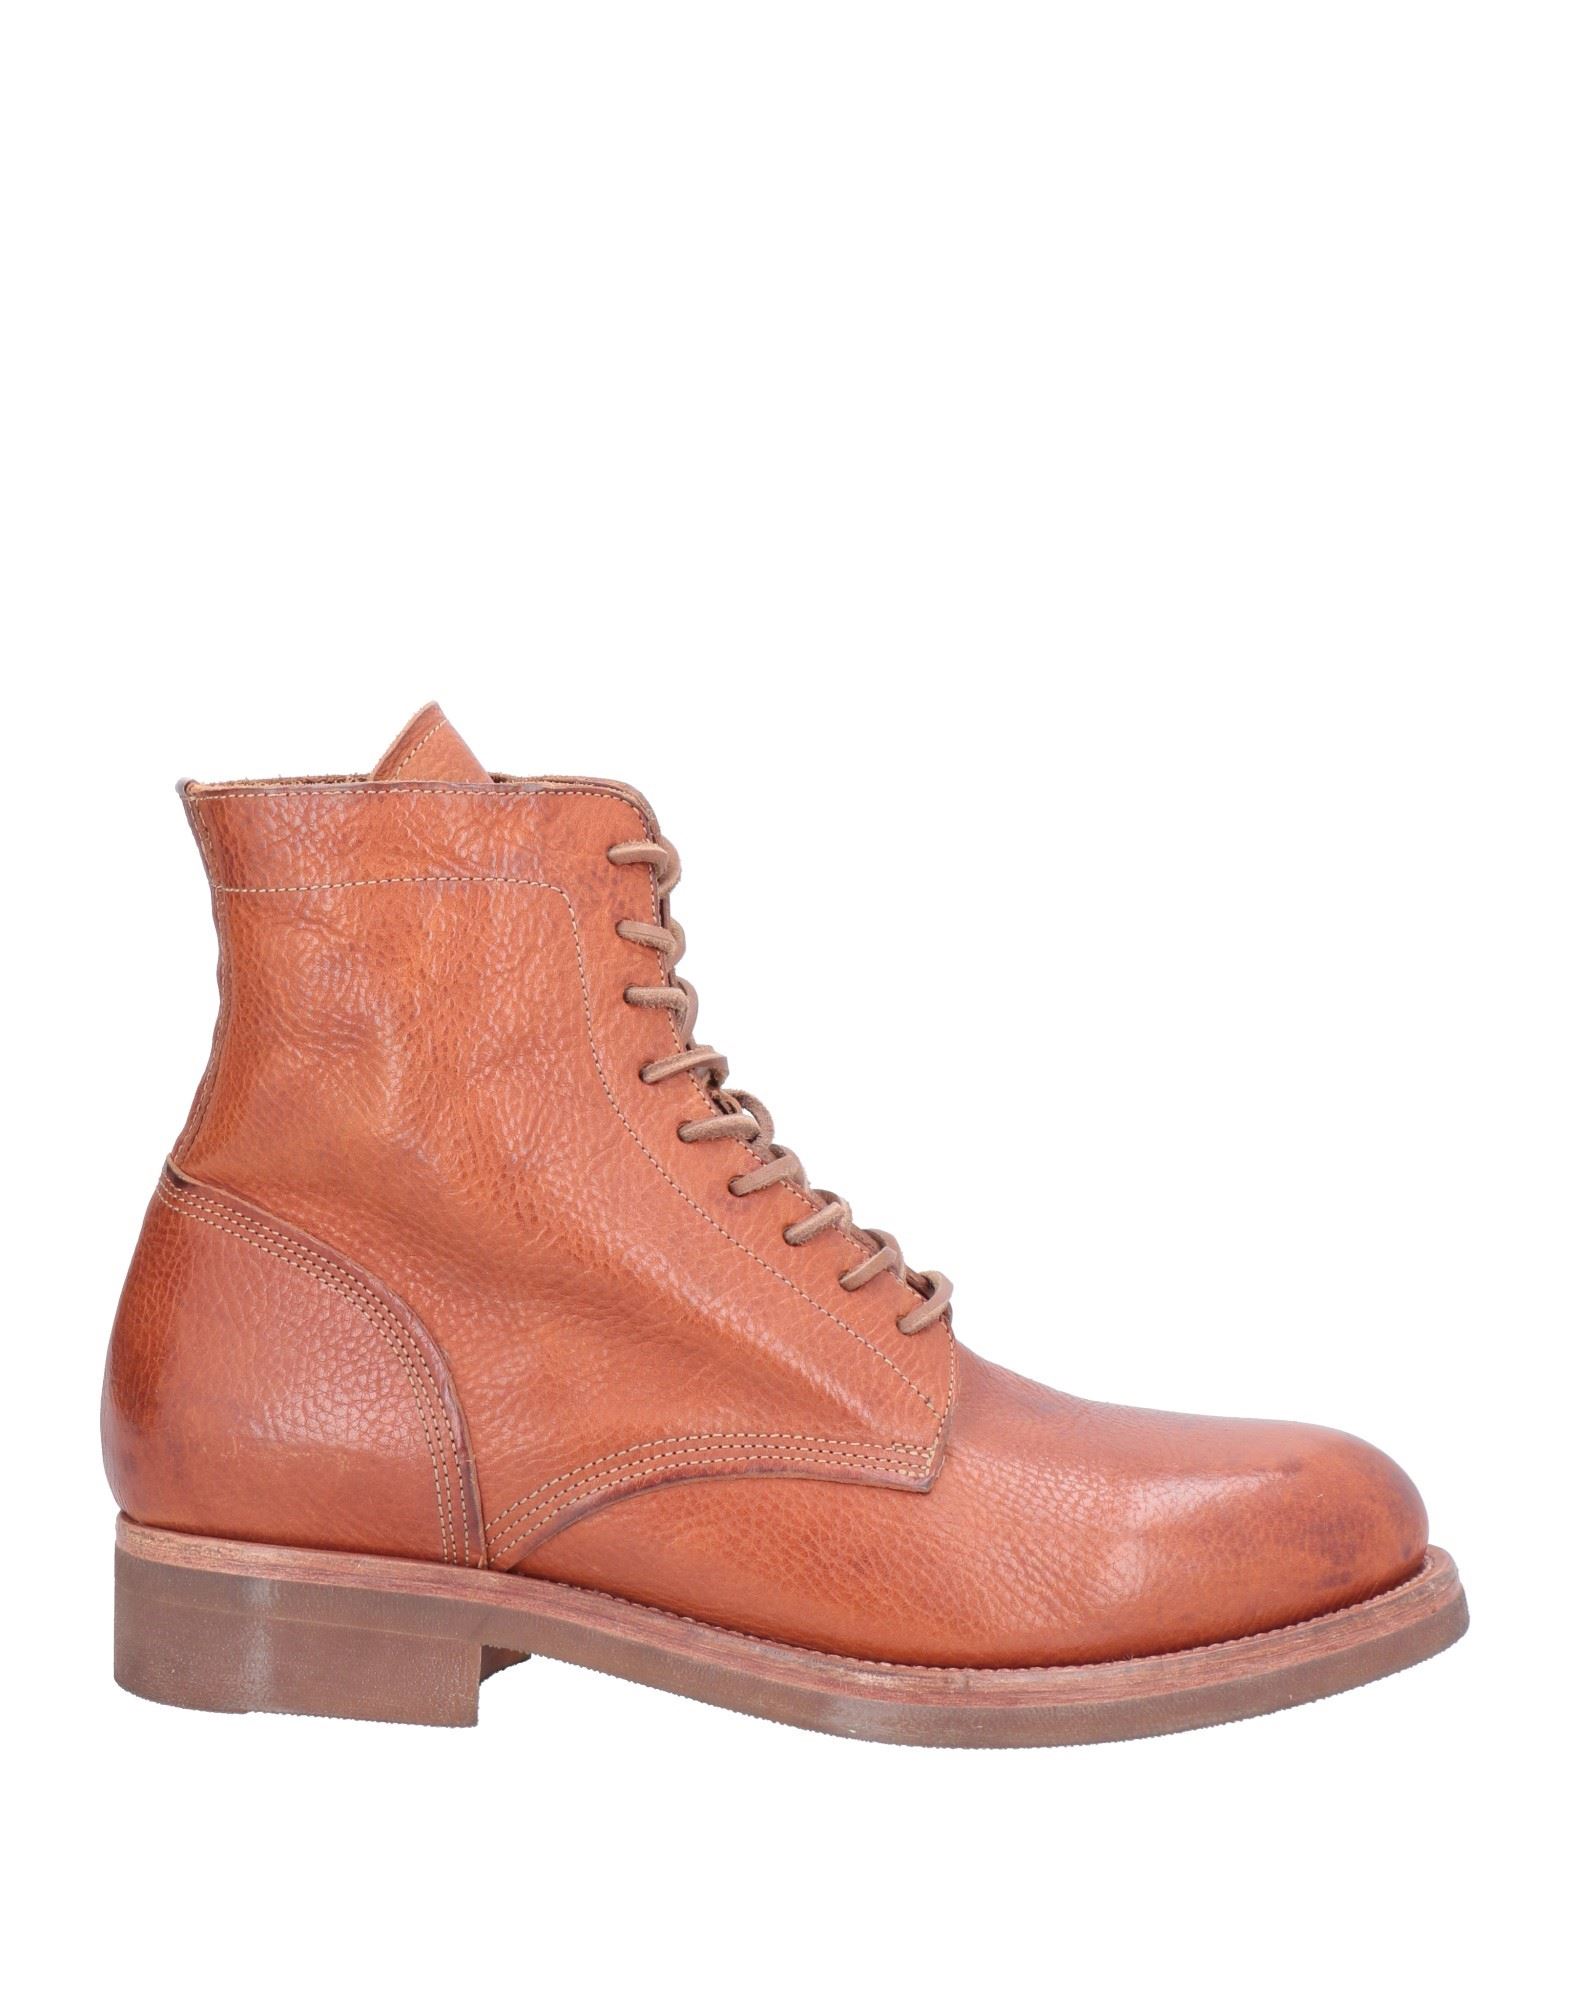 Buttero Ankle Boots In Tan